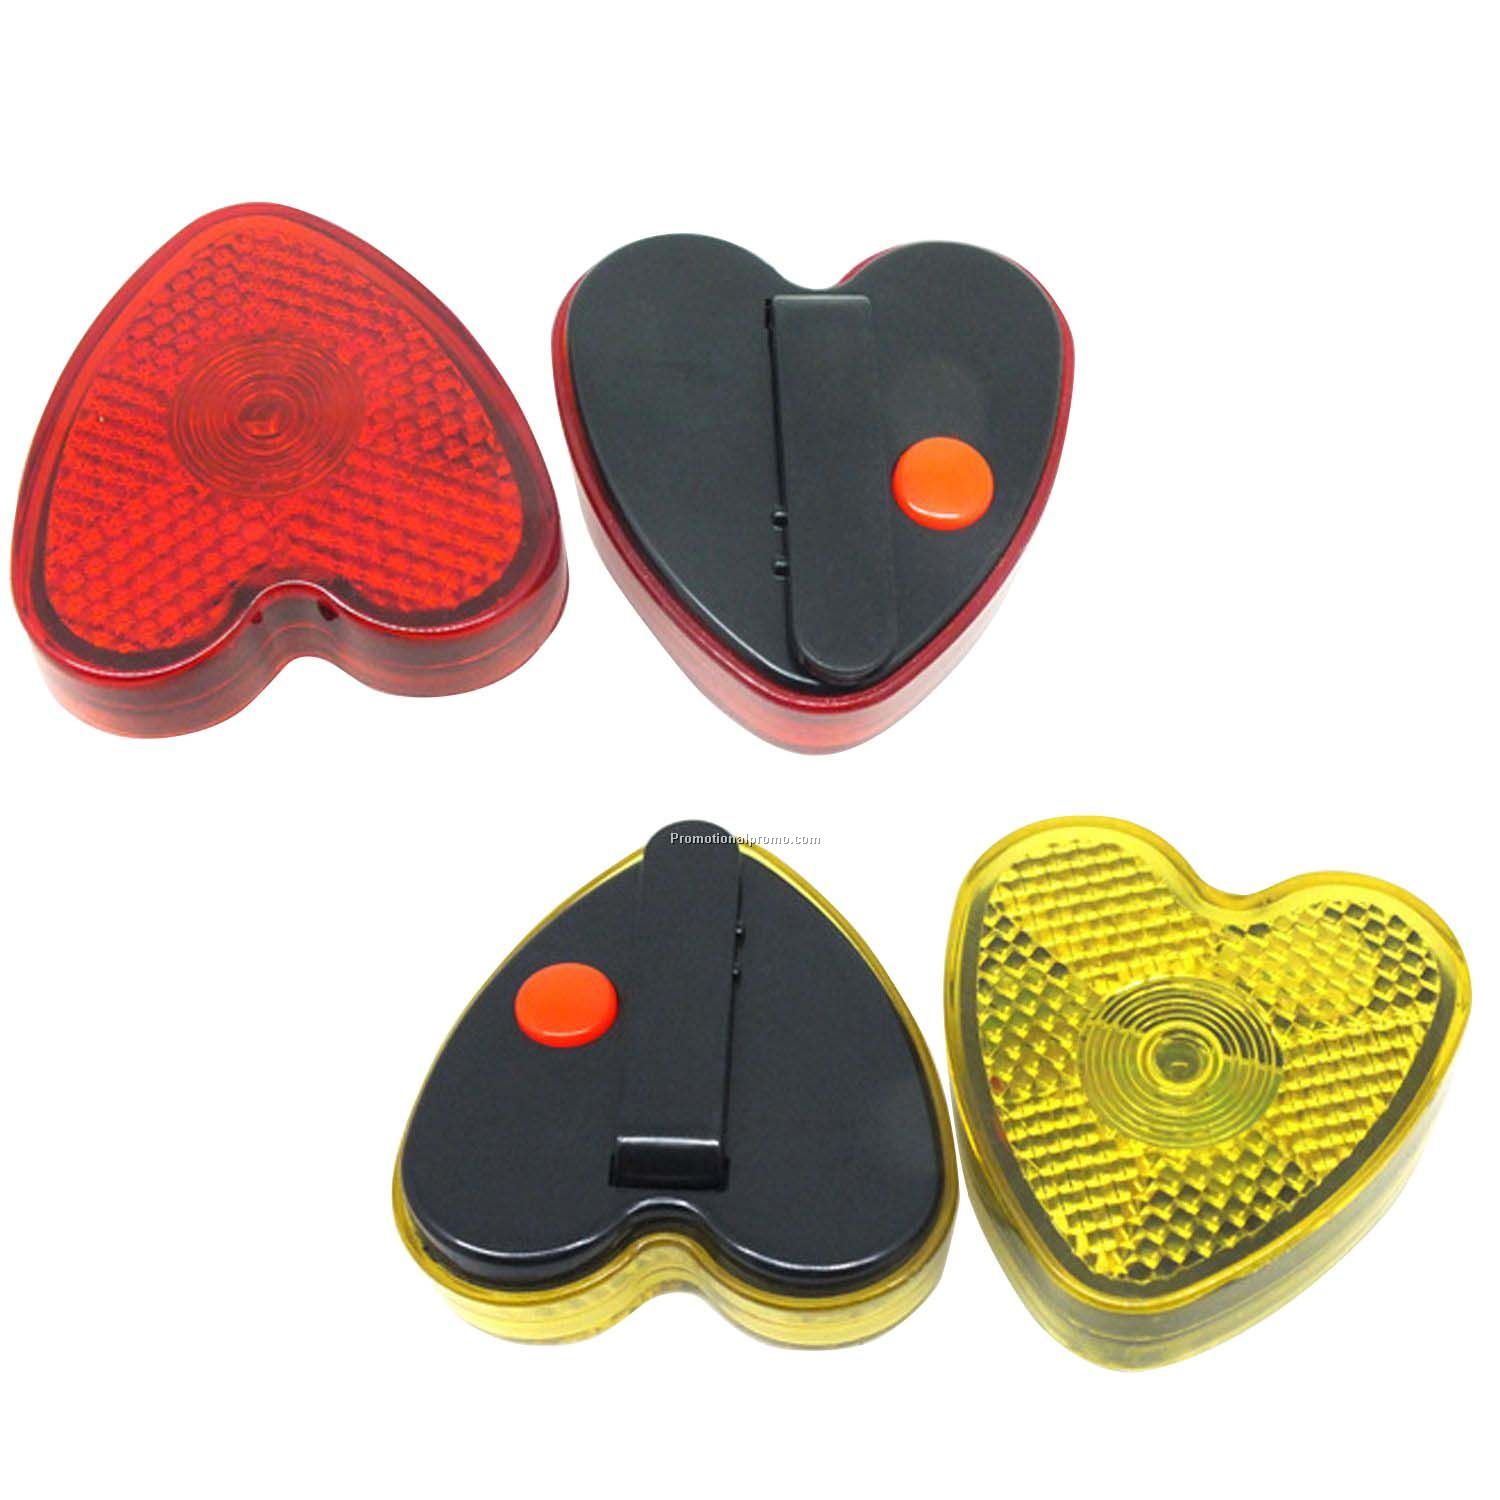 Promotional light up heart shaped safety reflector